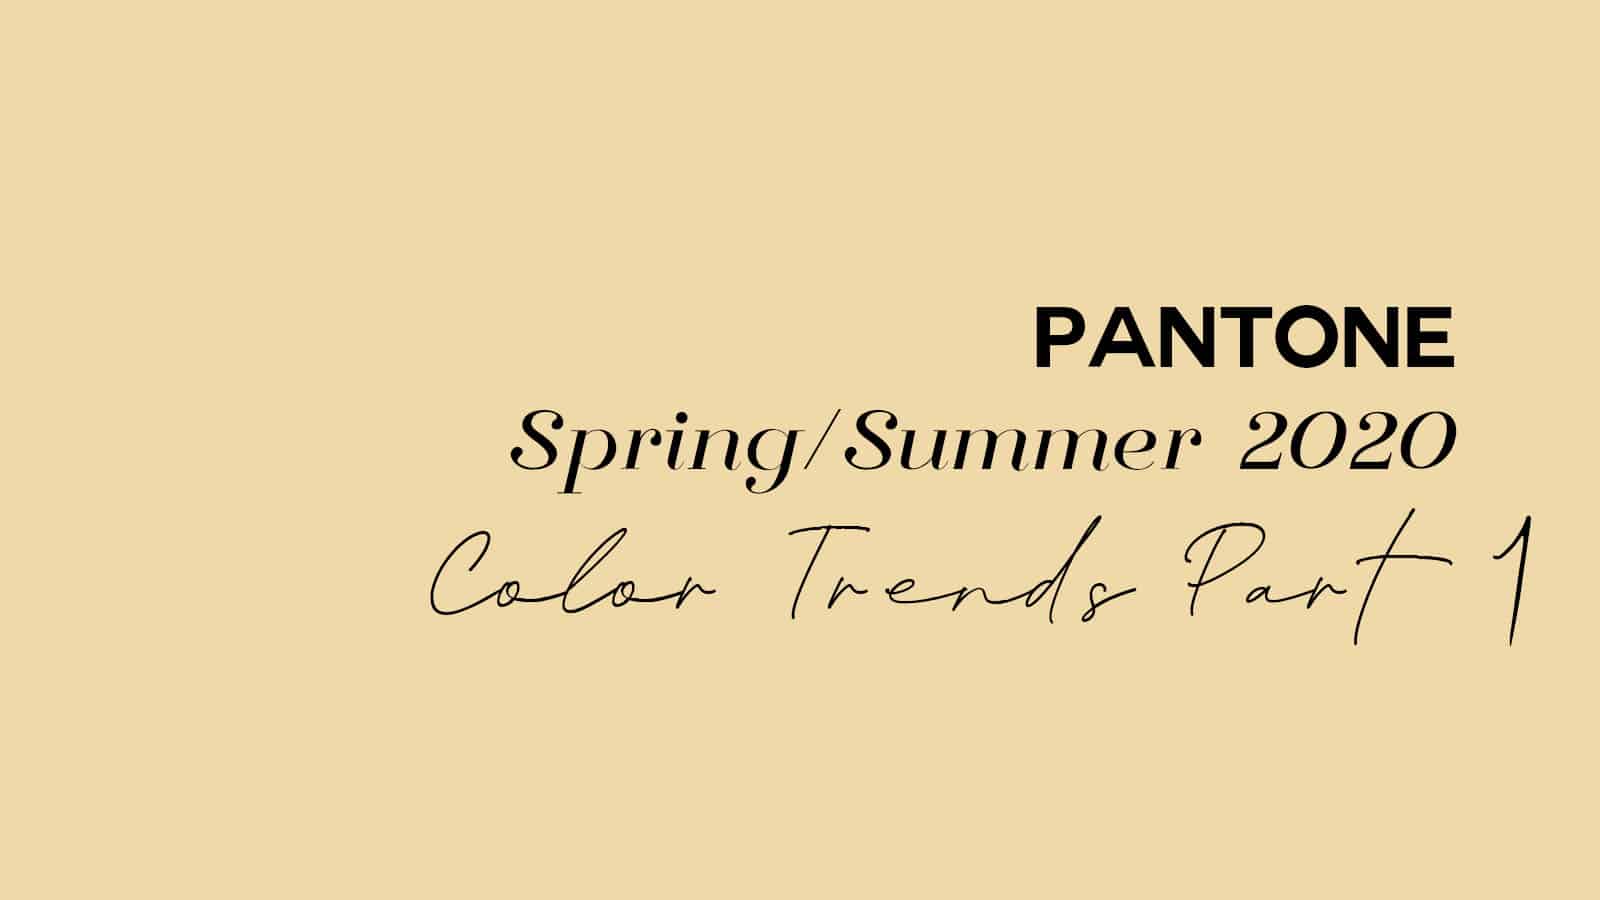 6 of the biggest color trends you need to try for Spring/Summer